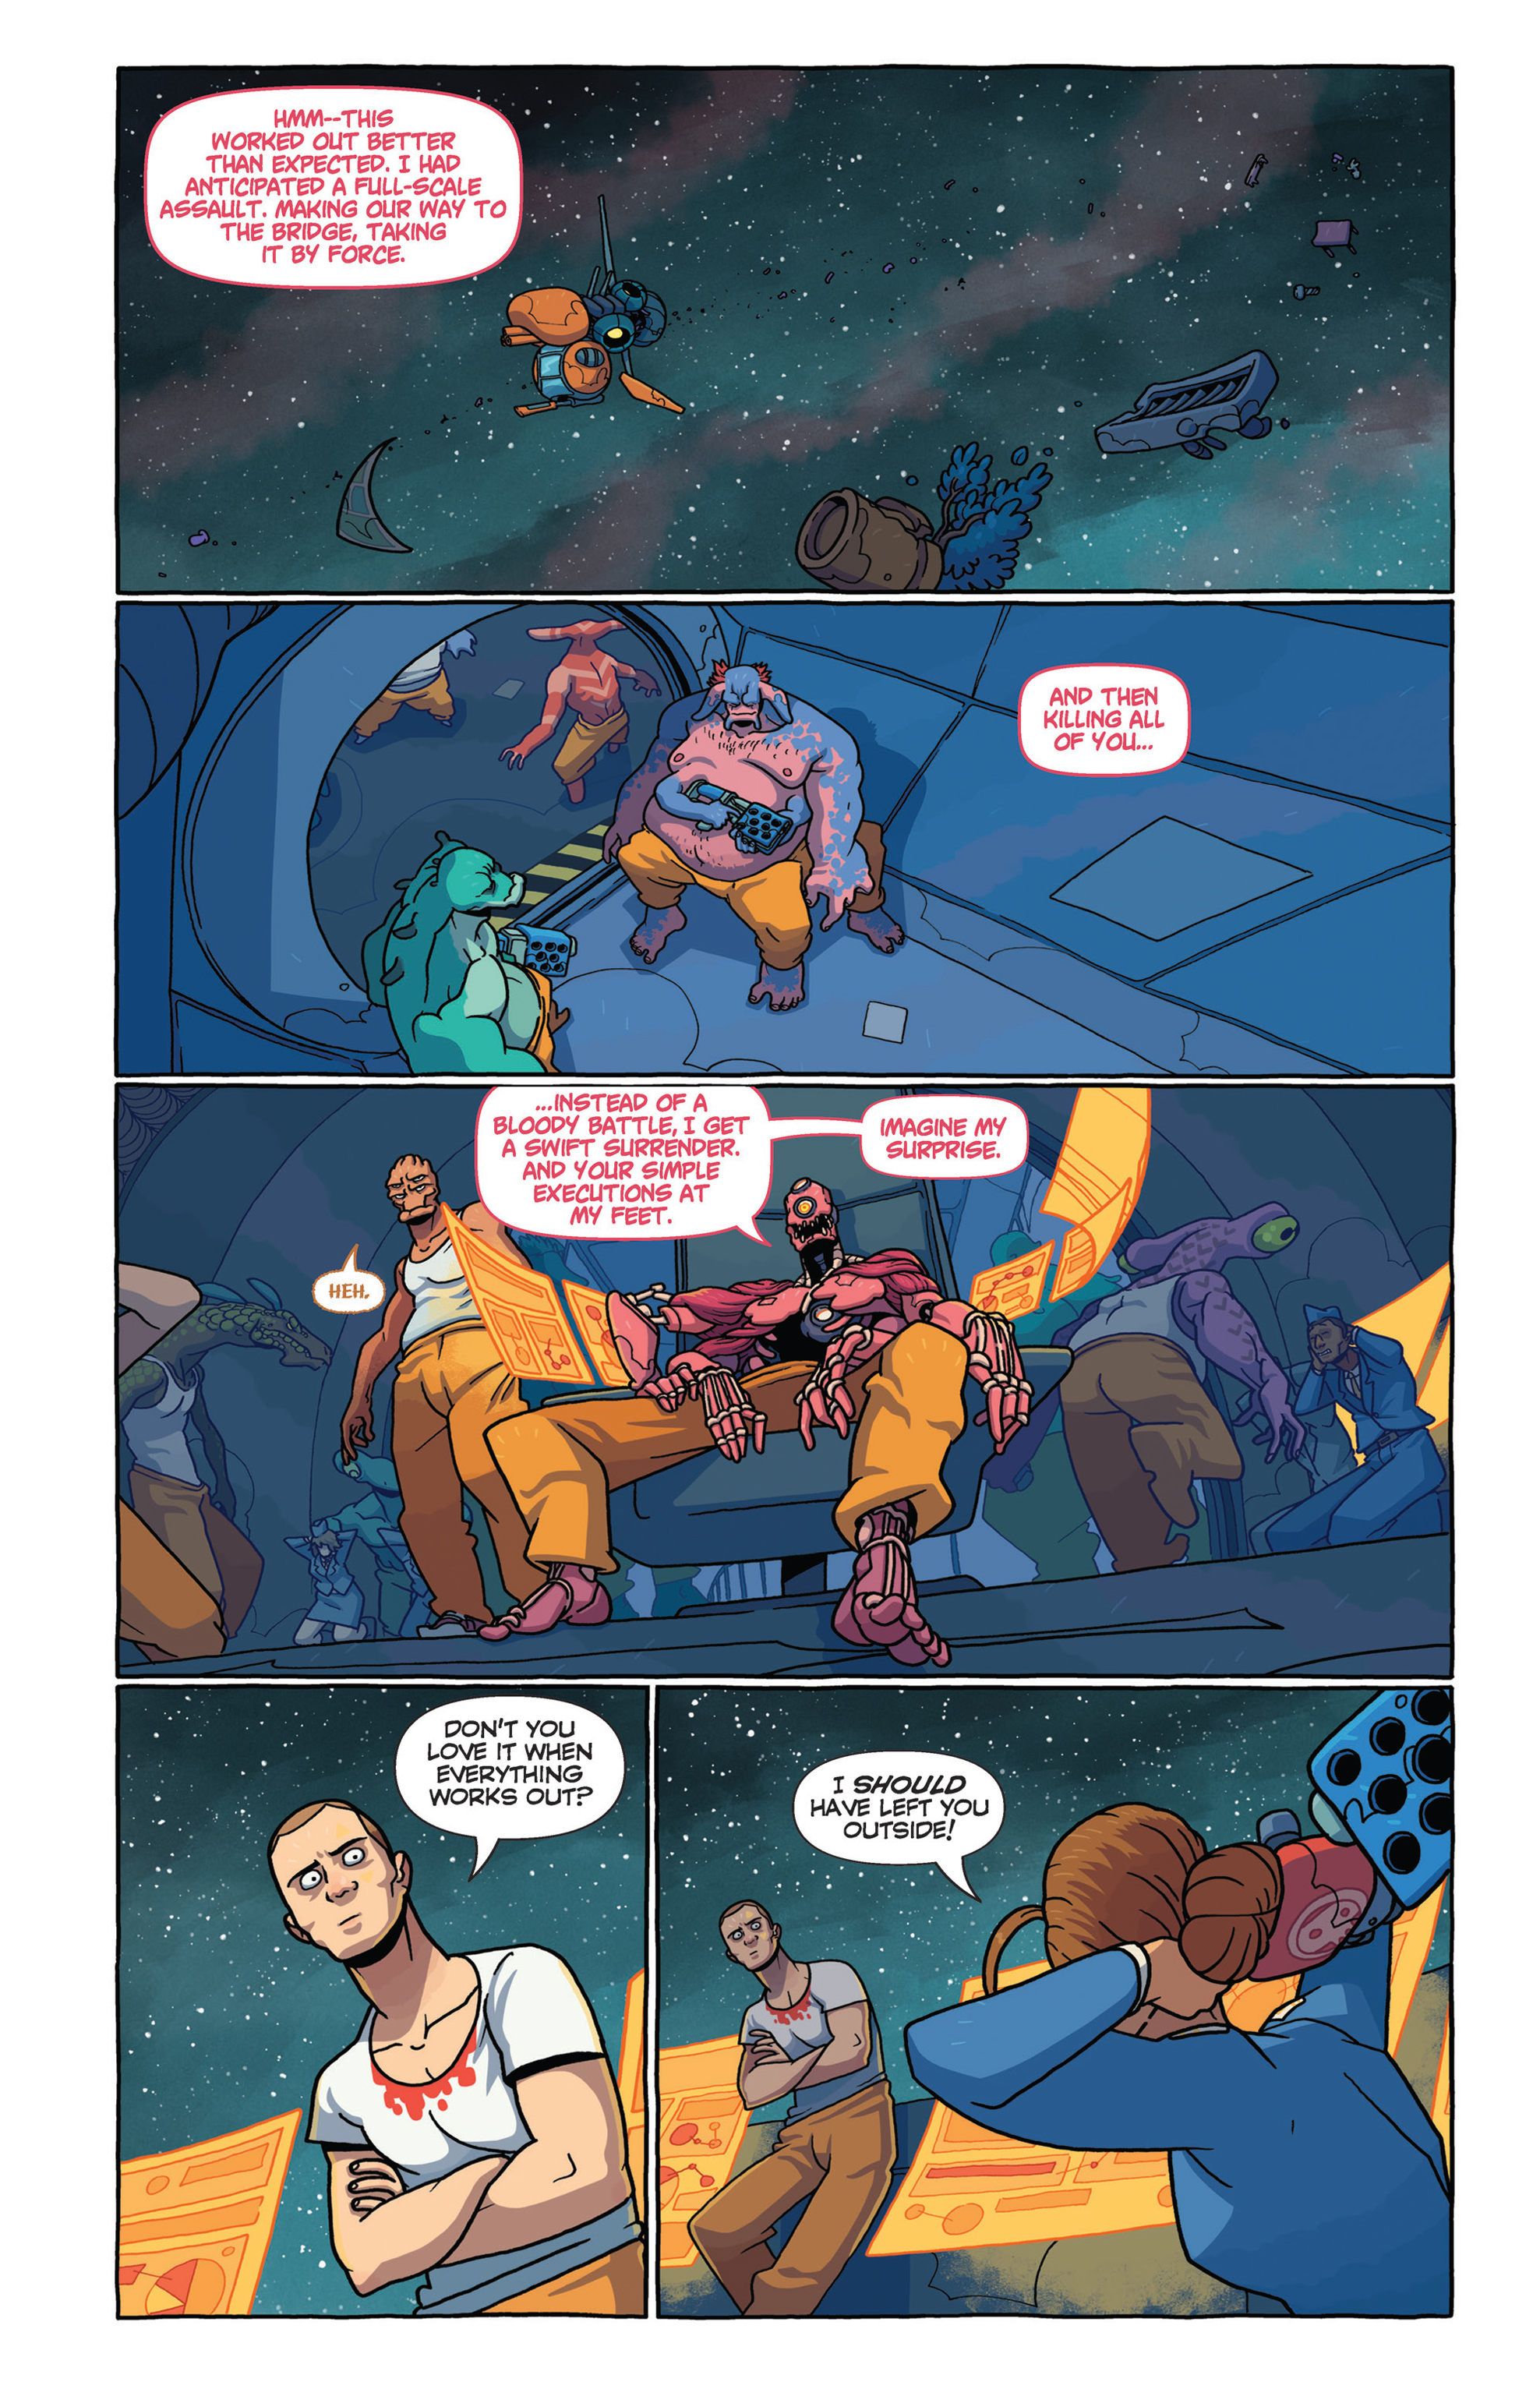 Offworld (2020-): Chapter 7 - Page 3